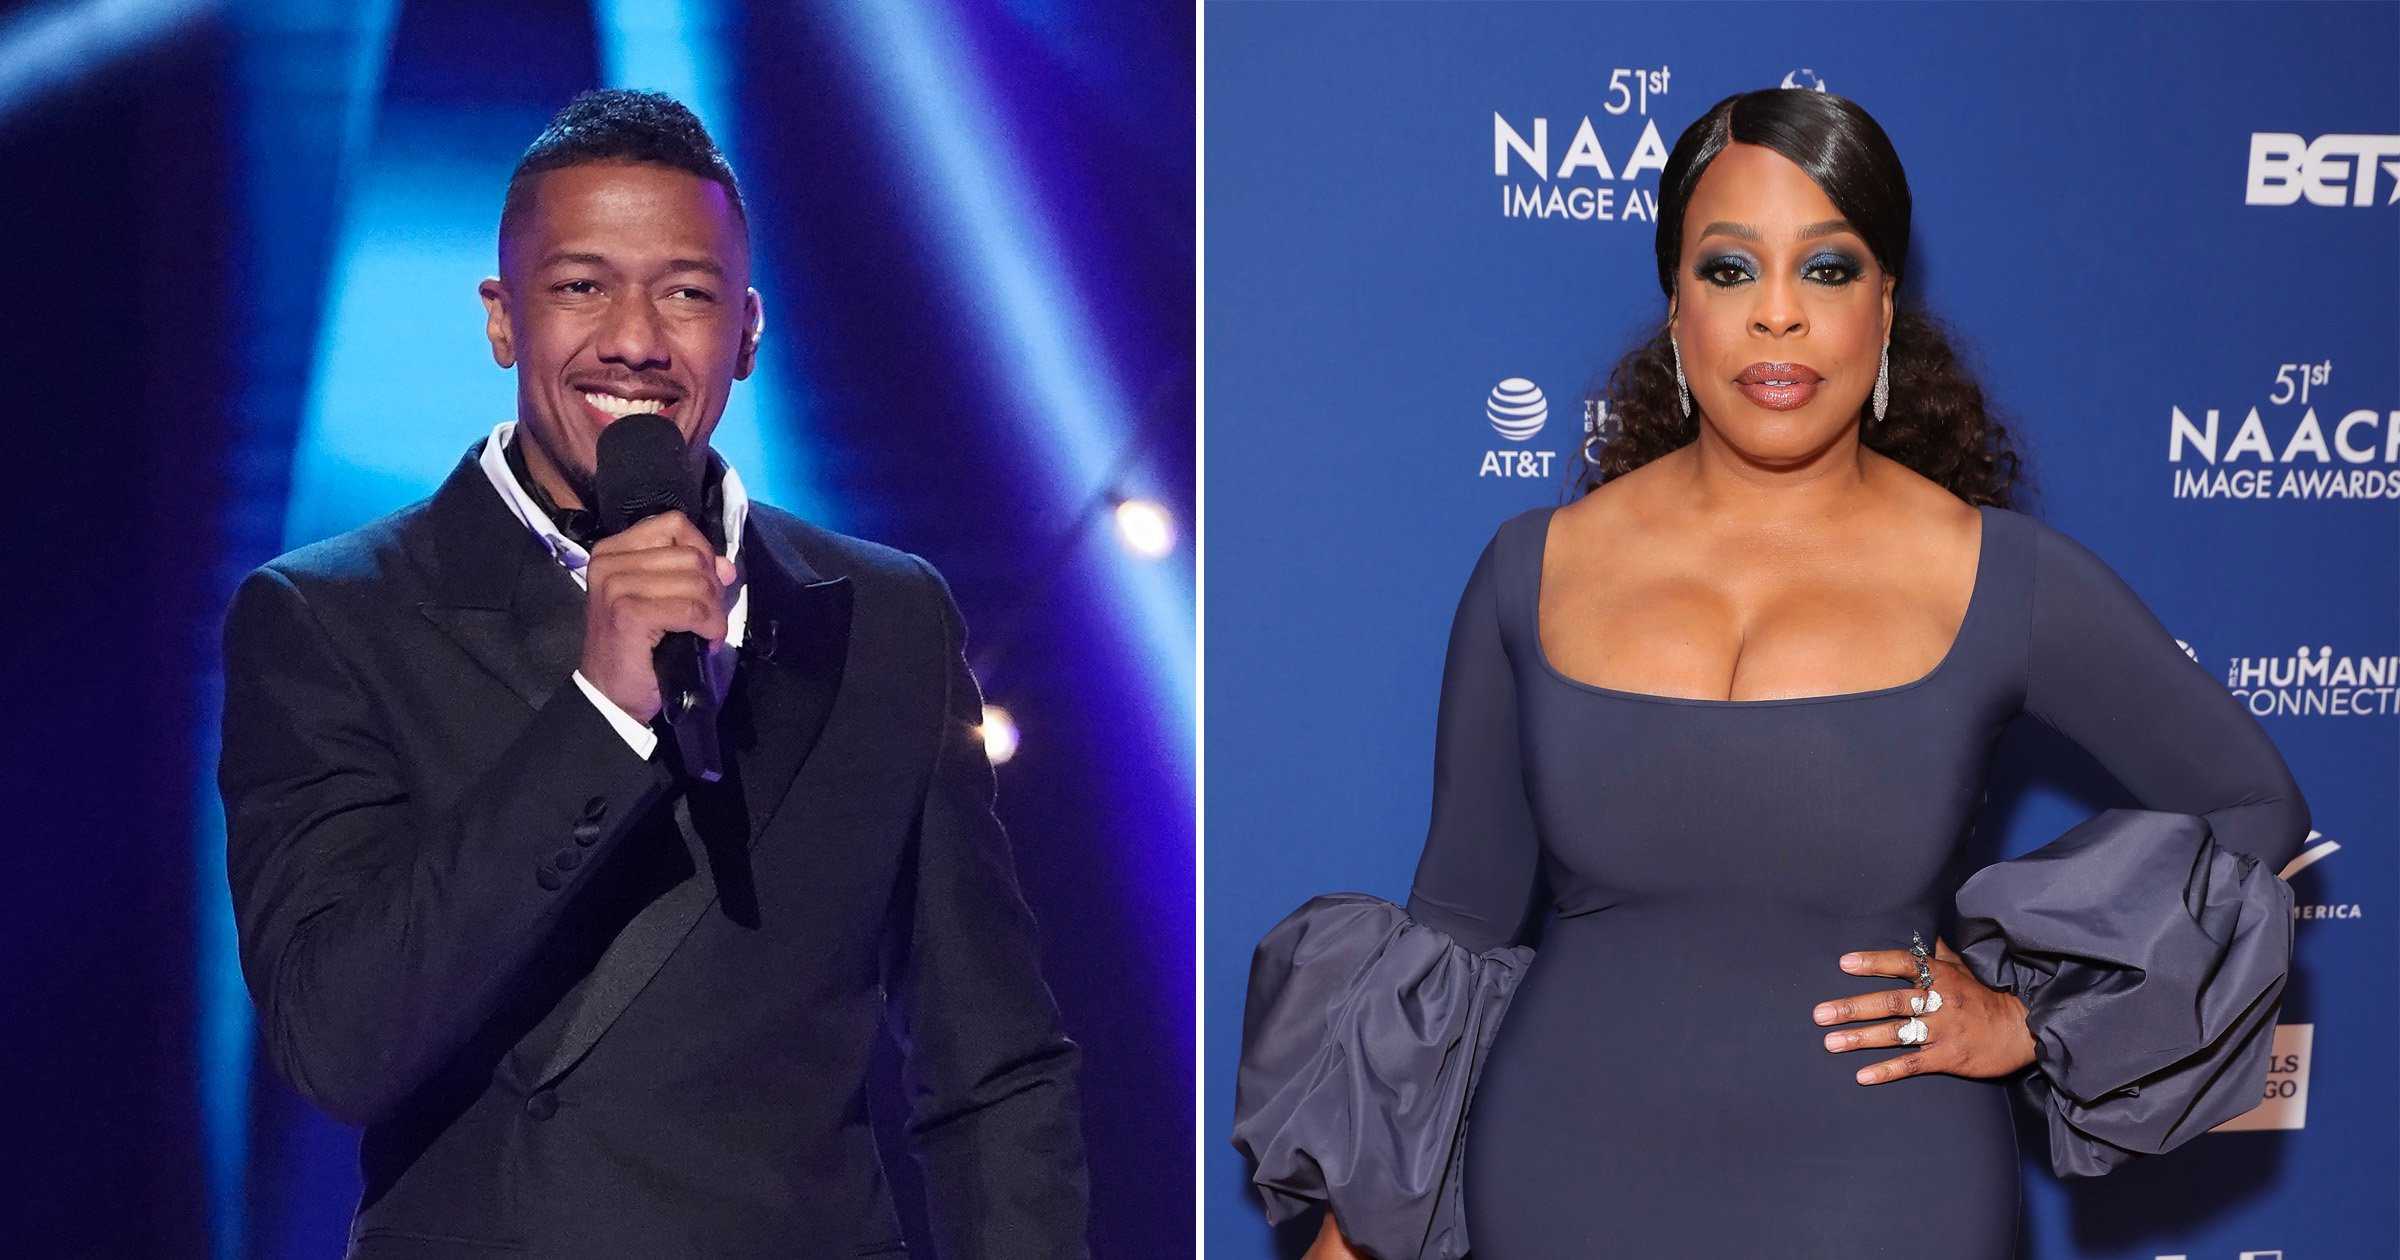 The Masked Singer’s Nick Cannon replaced by Niecy Nash after contracting Covid